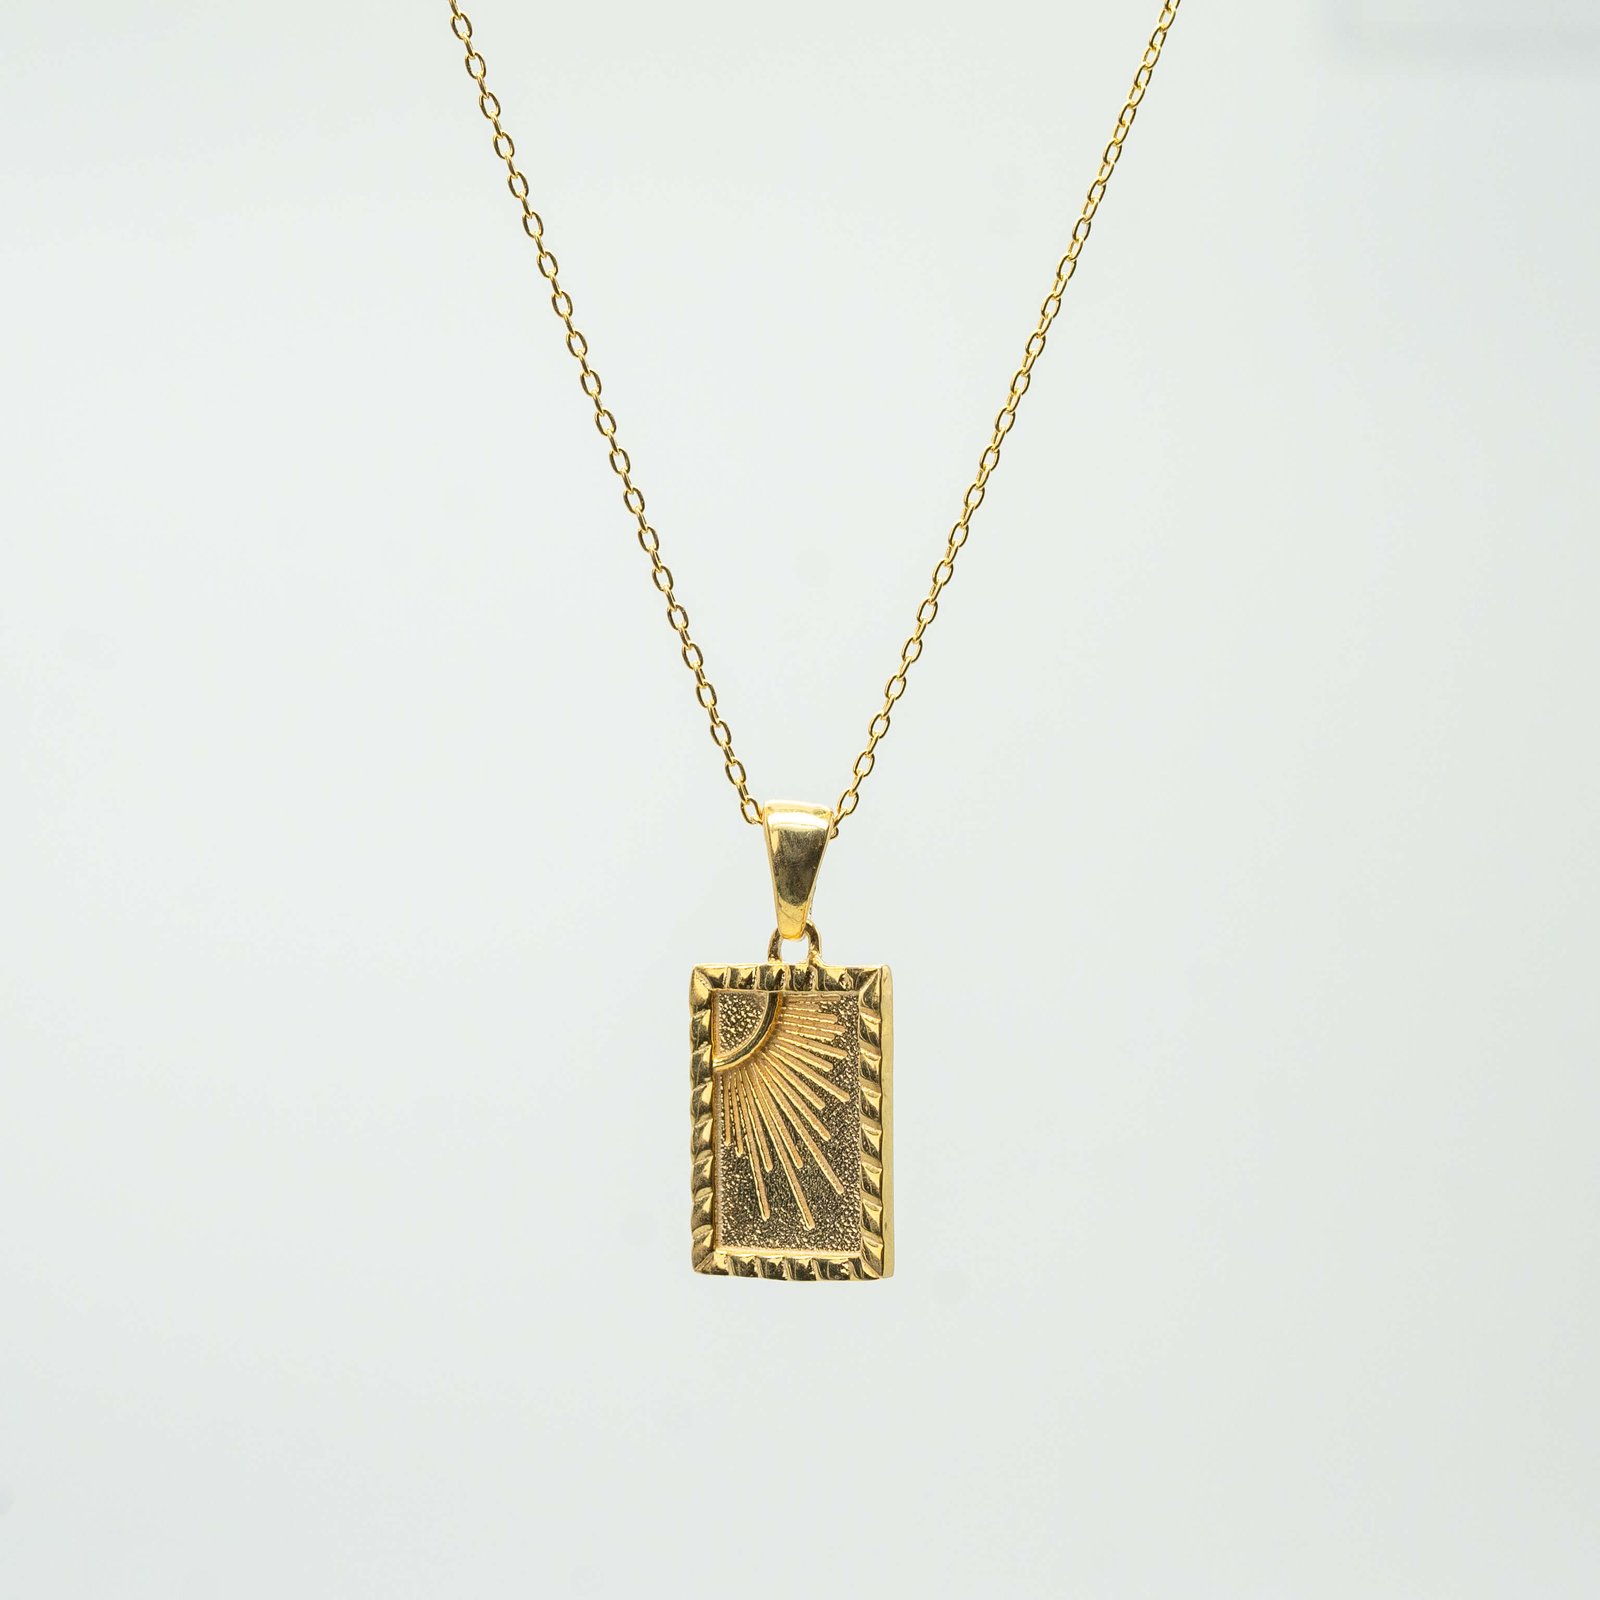 Sansar India Antique Golden Geometric Rectangle Pendant Gold-plated Plated  Metal Necklace Price in India - Buy Sansar India Antique Golden Geometric Rectangle  Pendant Gold-plated Plated Metal Necklace Online at Best Prices in